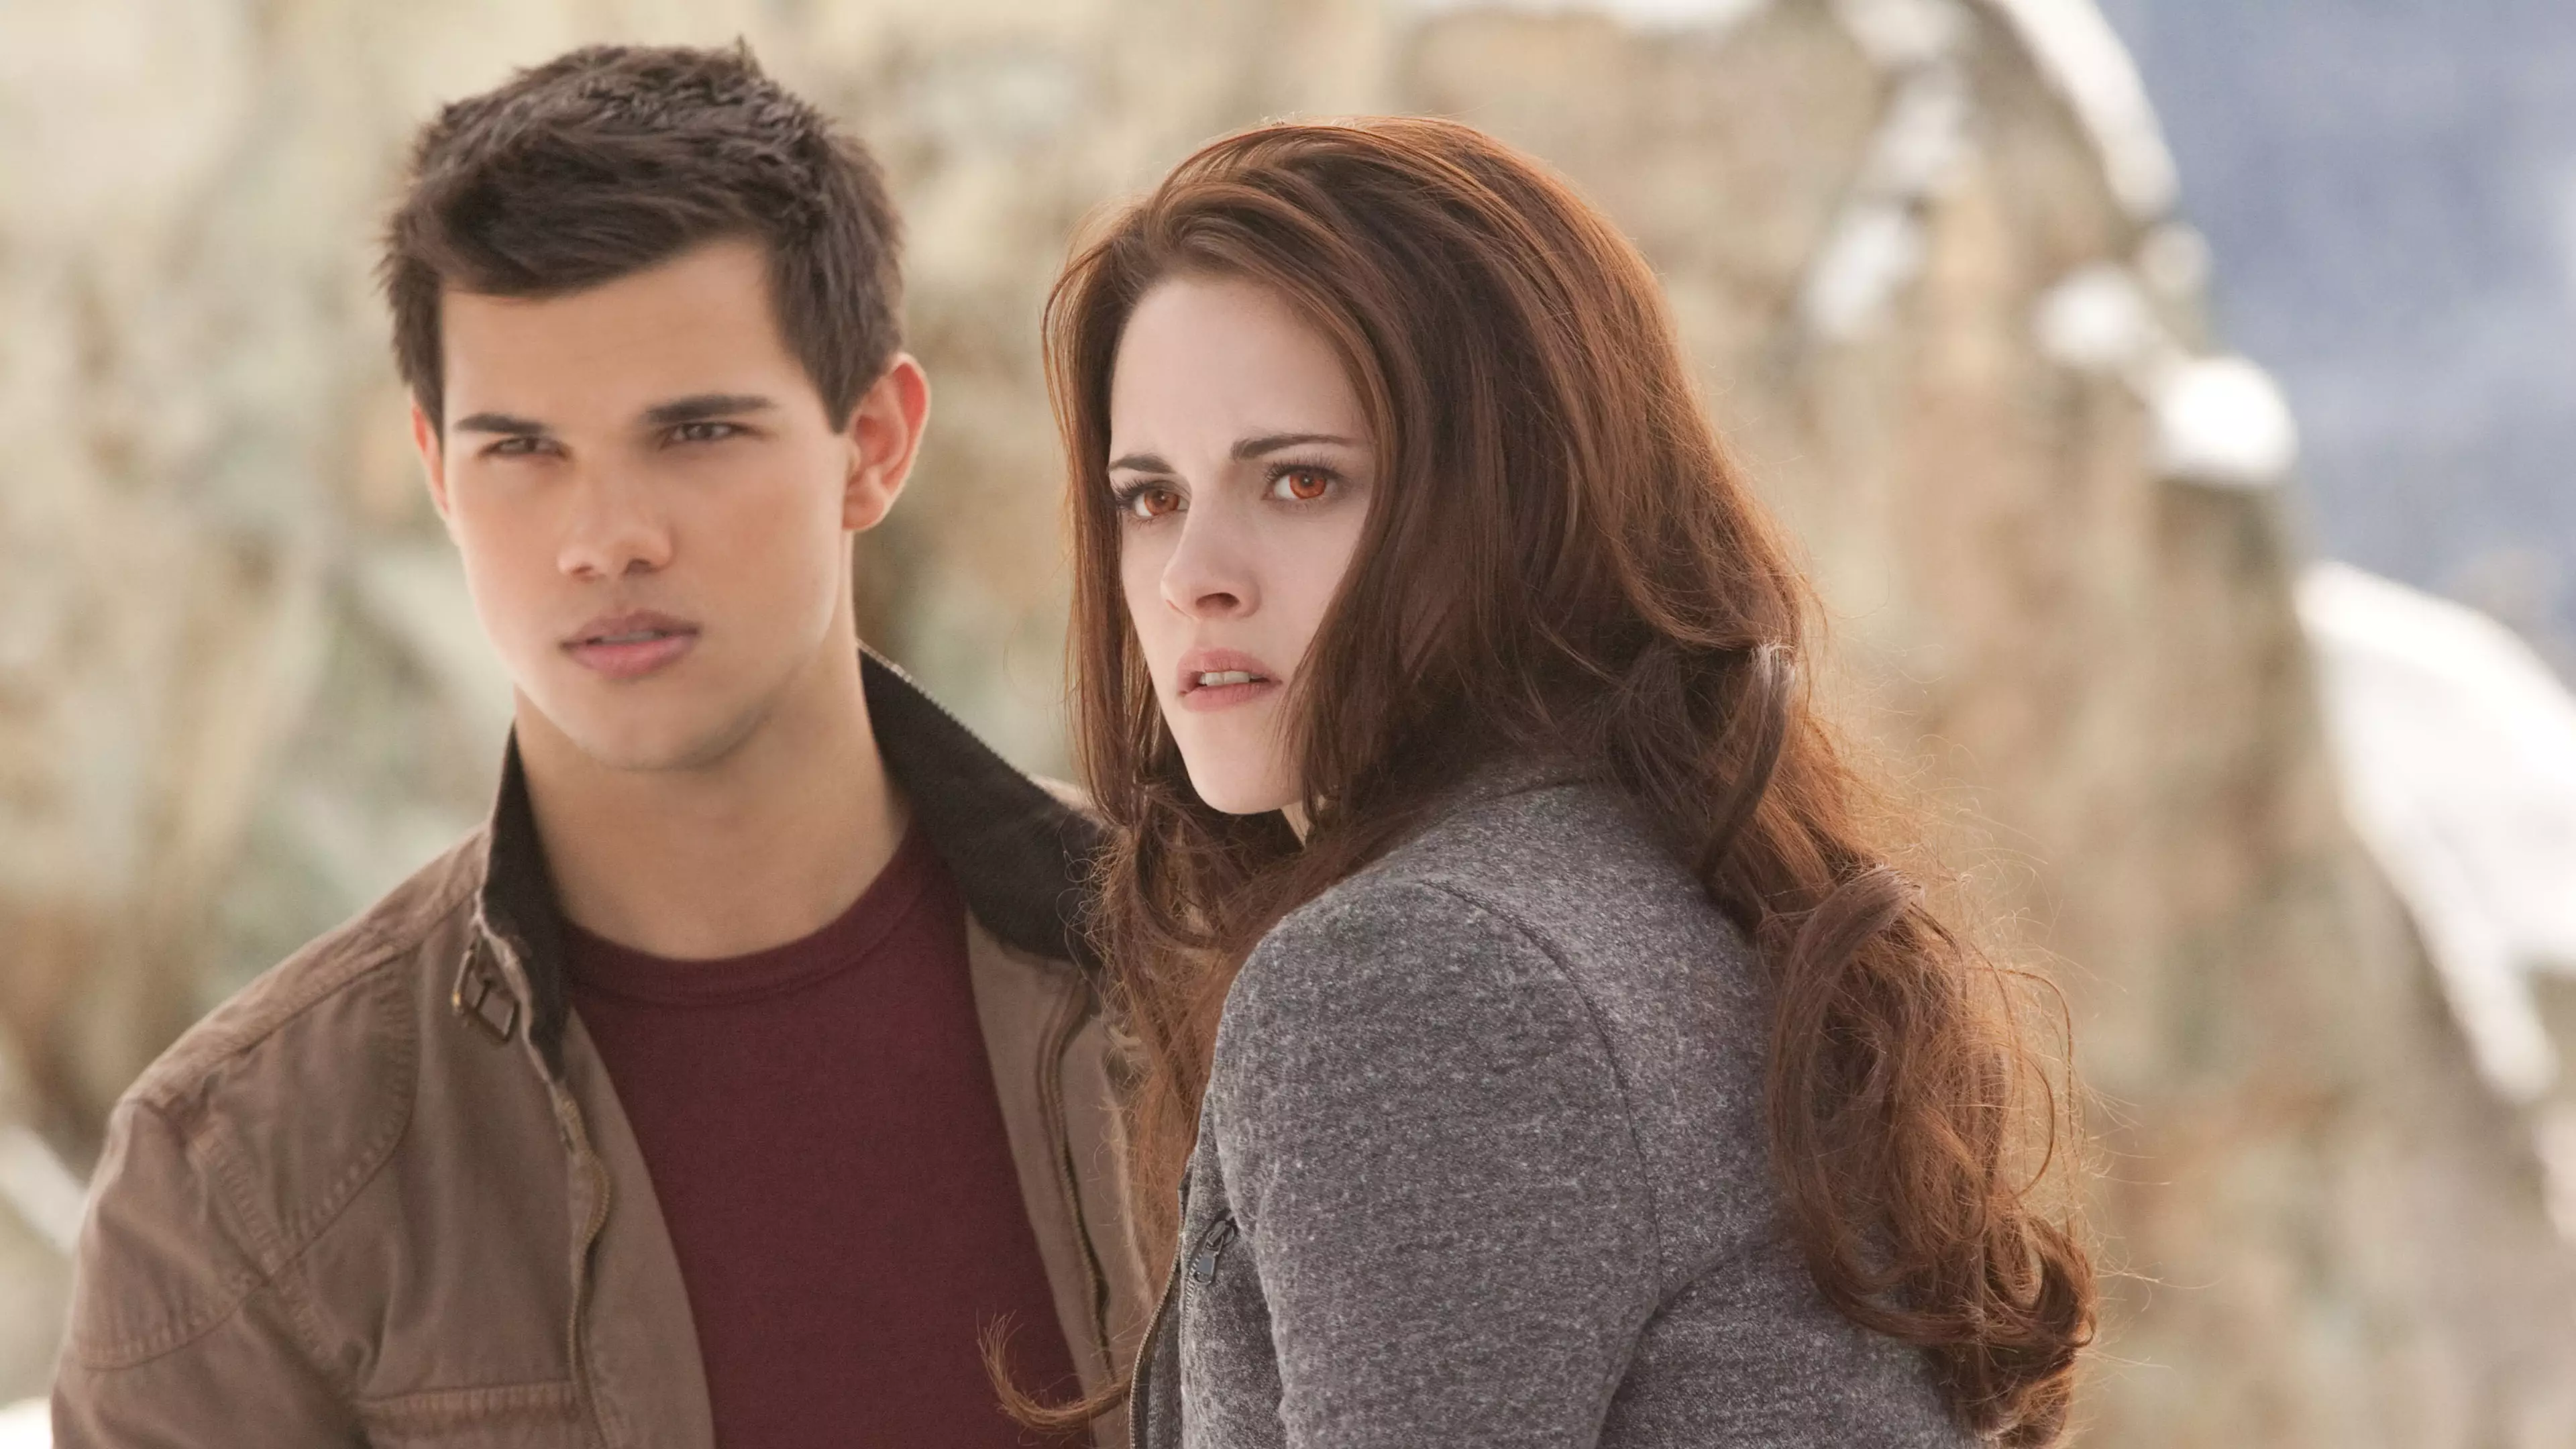 All Of The 'Twilight' Movies Are Coming Back To Netflix Next Month